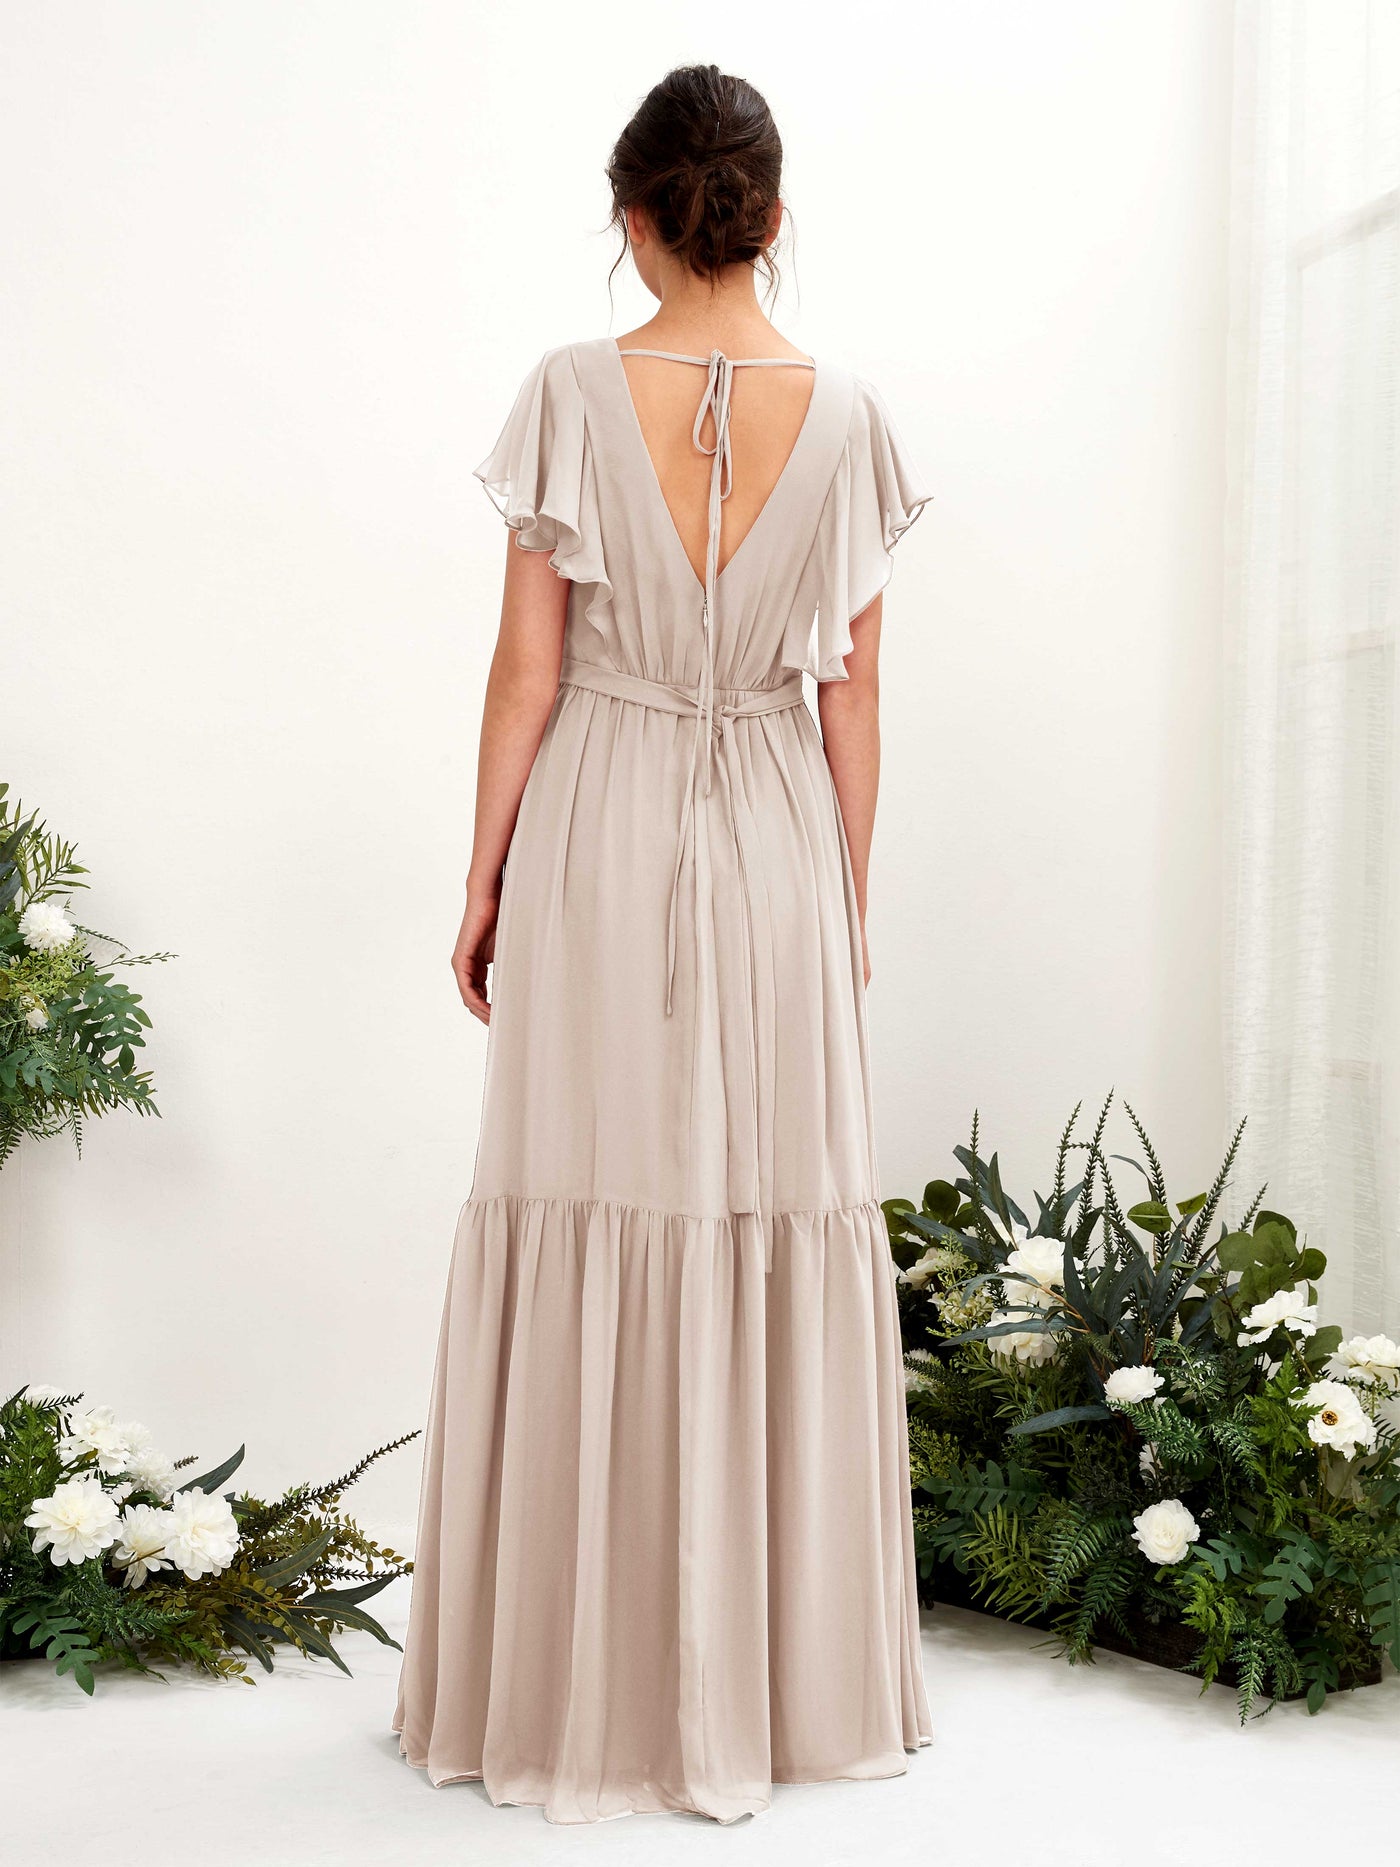 Champagne Bridesmaid Dresses Bridesmaid Dress A-line Chiffon V-neck Full Length Short Sleeves Wedding Party Dress (81225916)#color_champagne